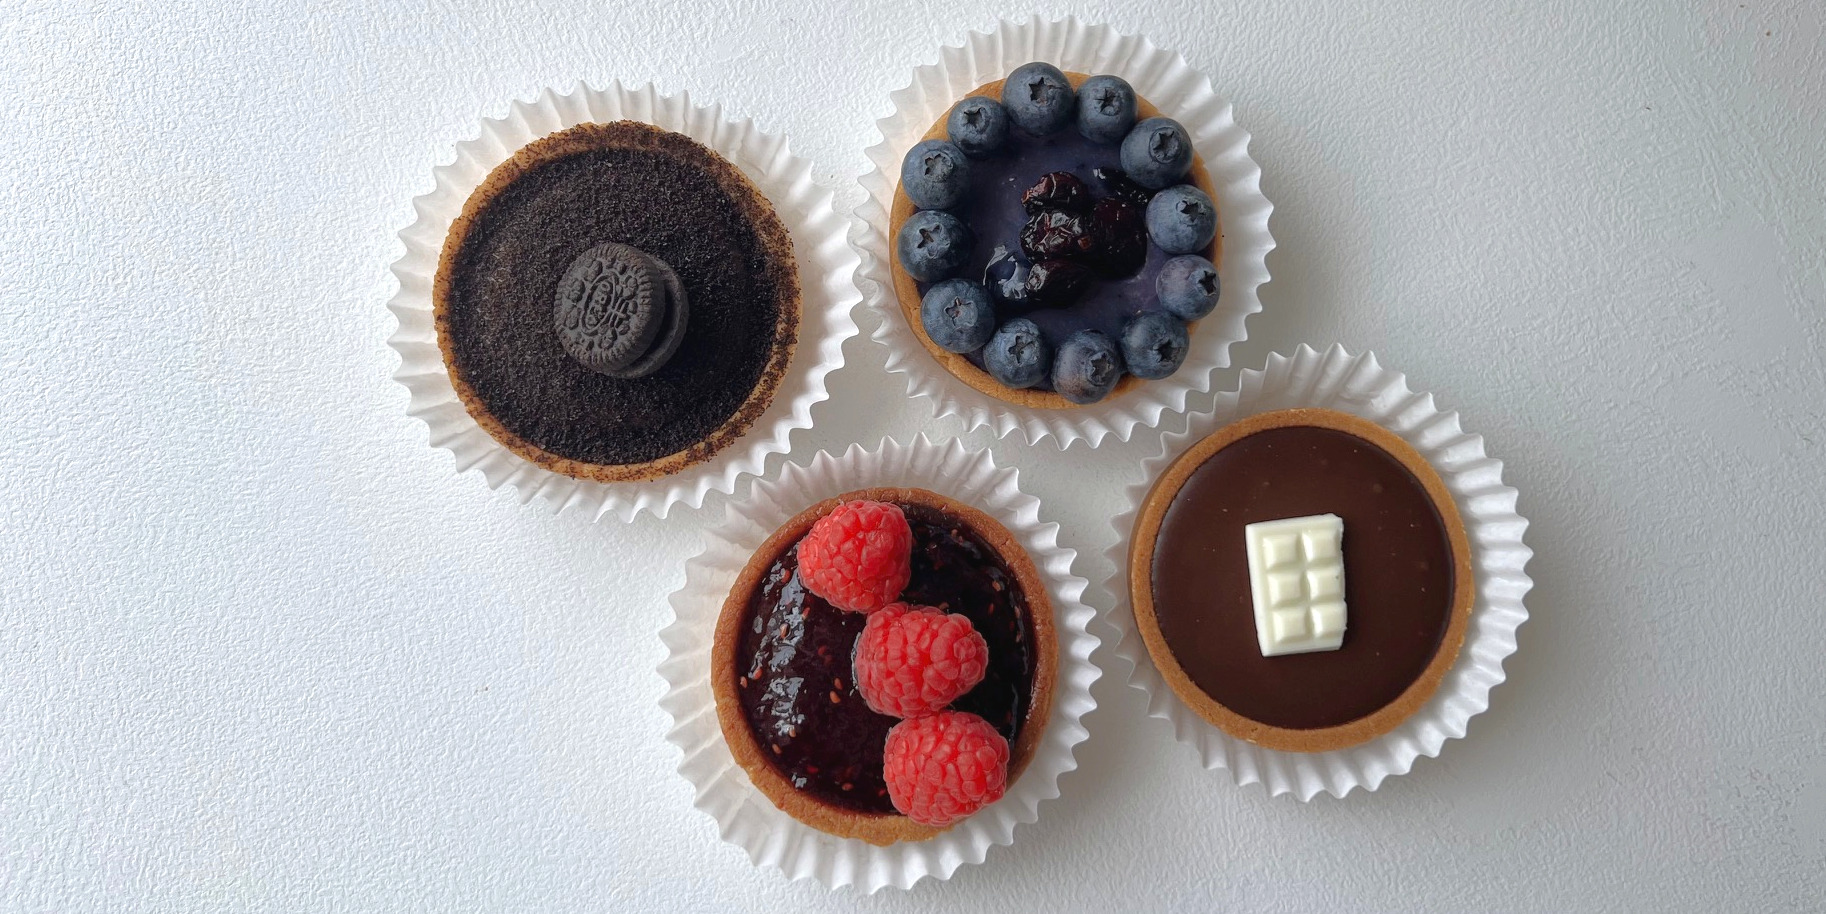 Four chocolate tarts from Tasty Tart in Champaign, Illinois. Starting in the top left: Oreo, blueberry white chocolate, chocolate, and raspberry chocolate. Photo by Alyssa Buckley.